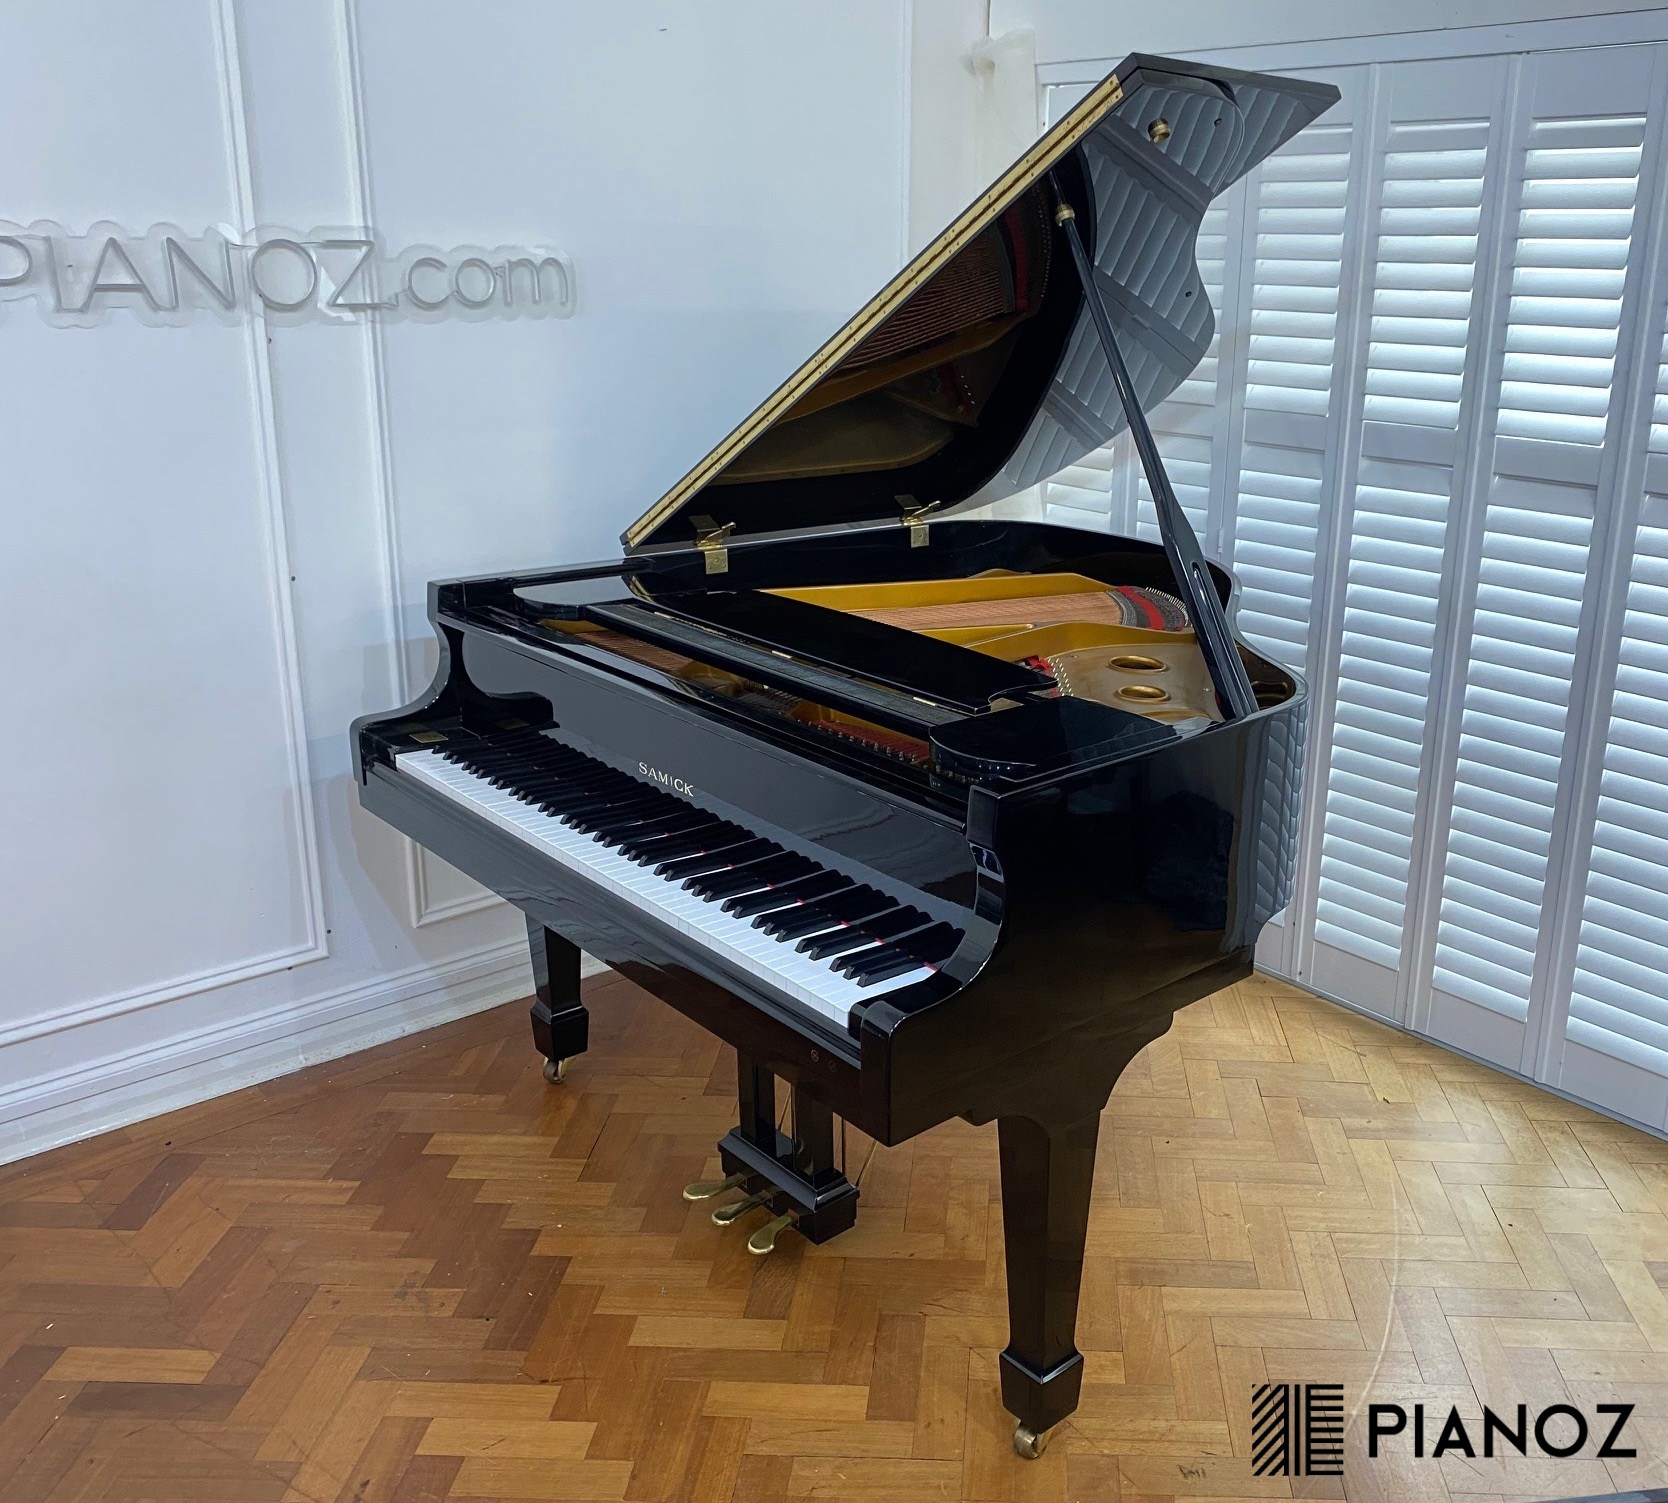 Samick Black High Gloss Baby Grand Piano piano for sale in UK